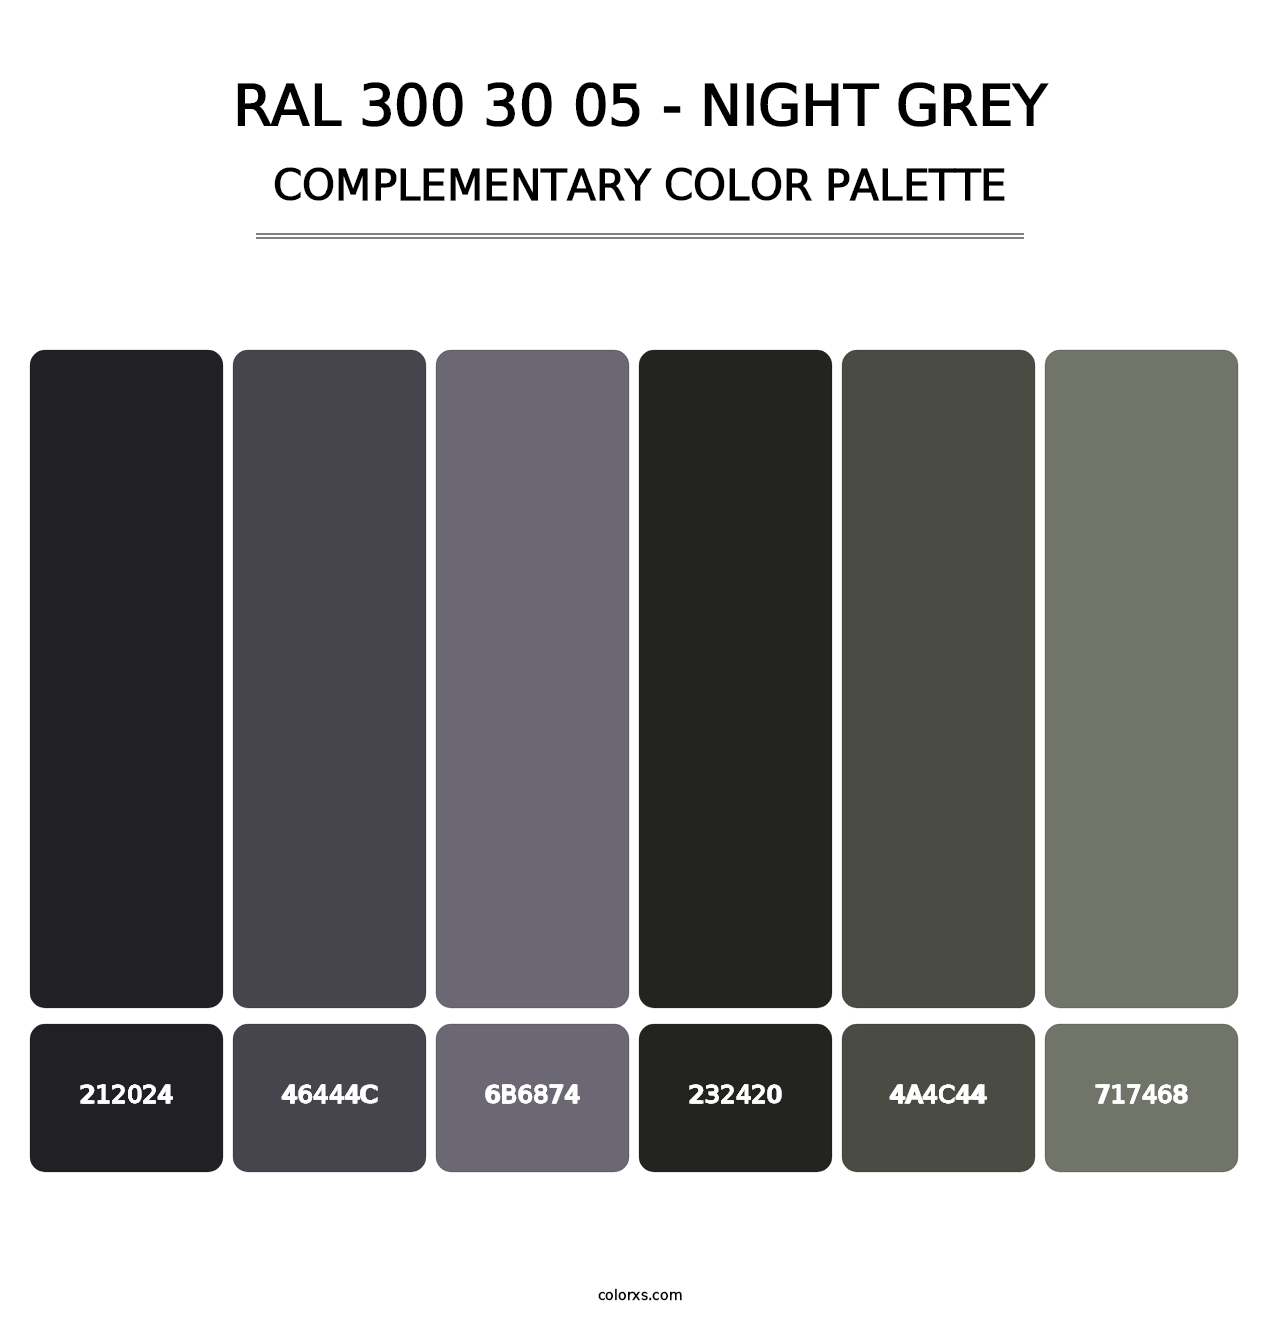 RAL 300 30 05 - Night Grey - Complementary Color Palette